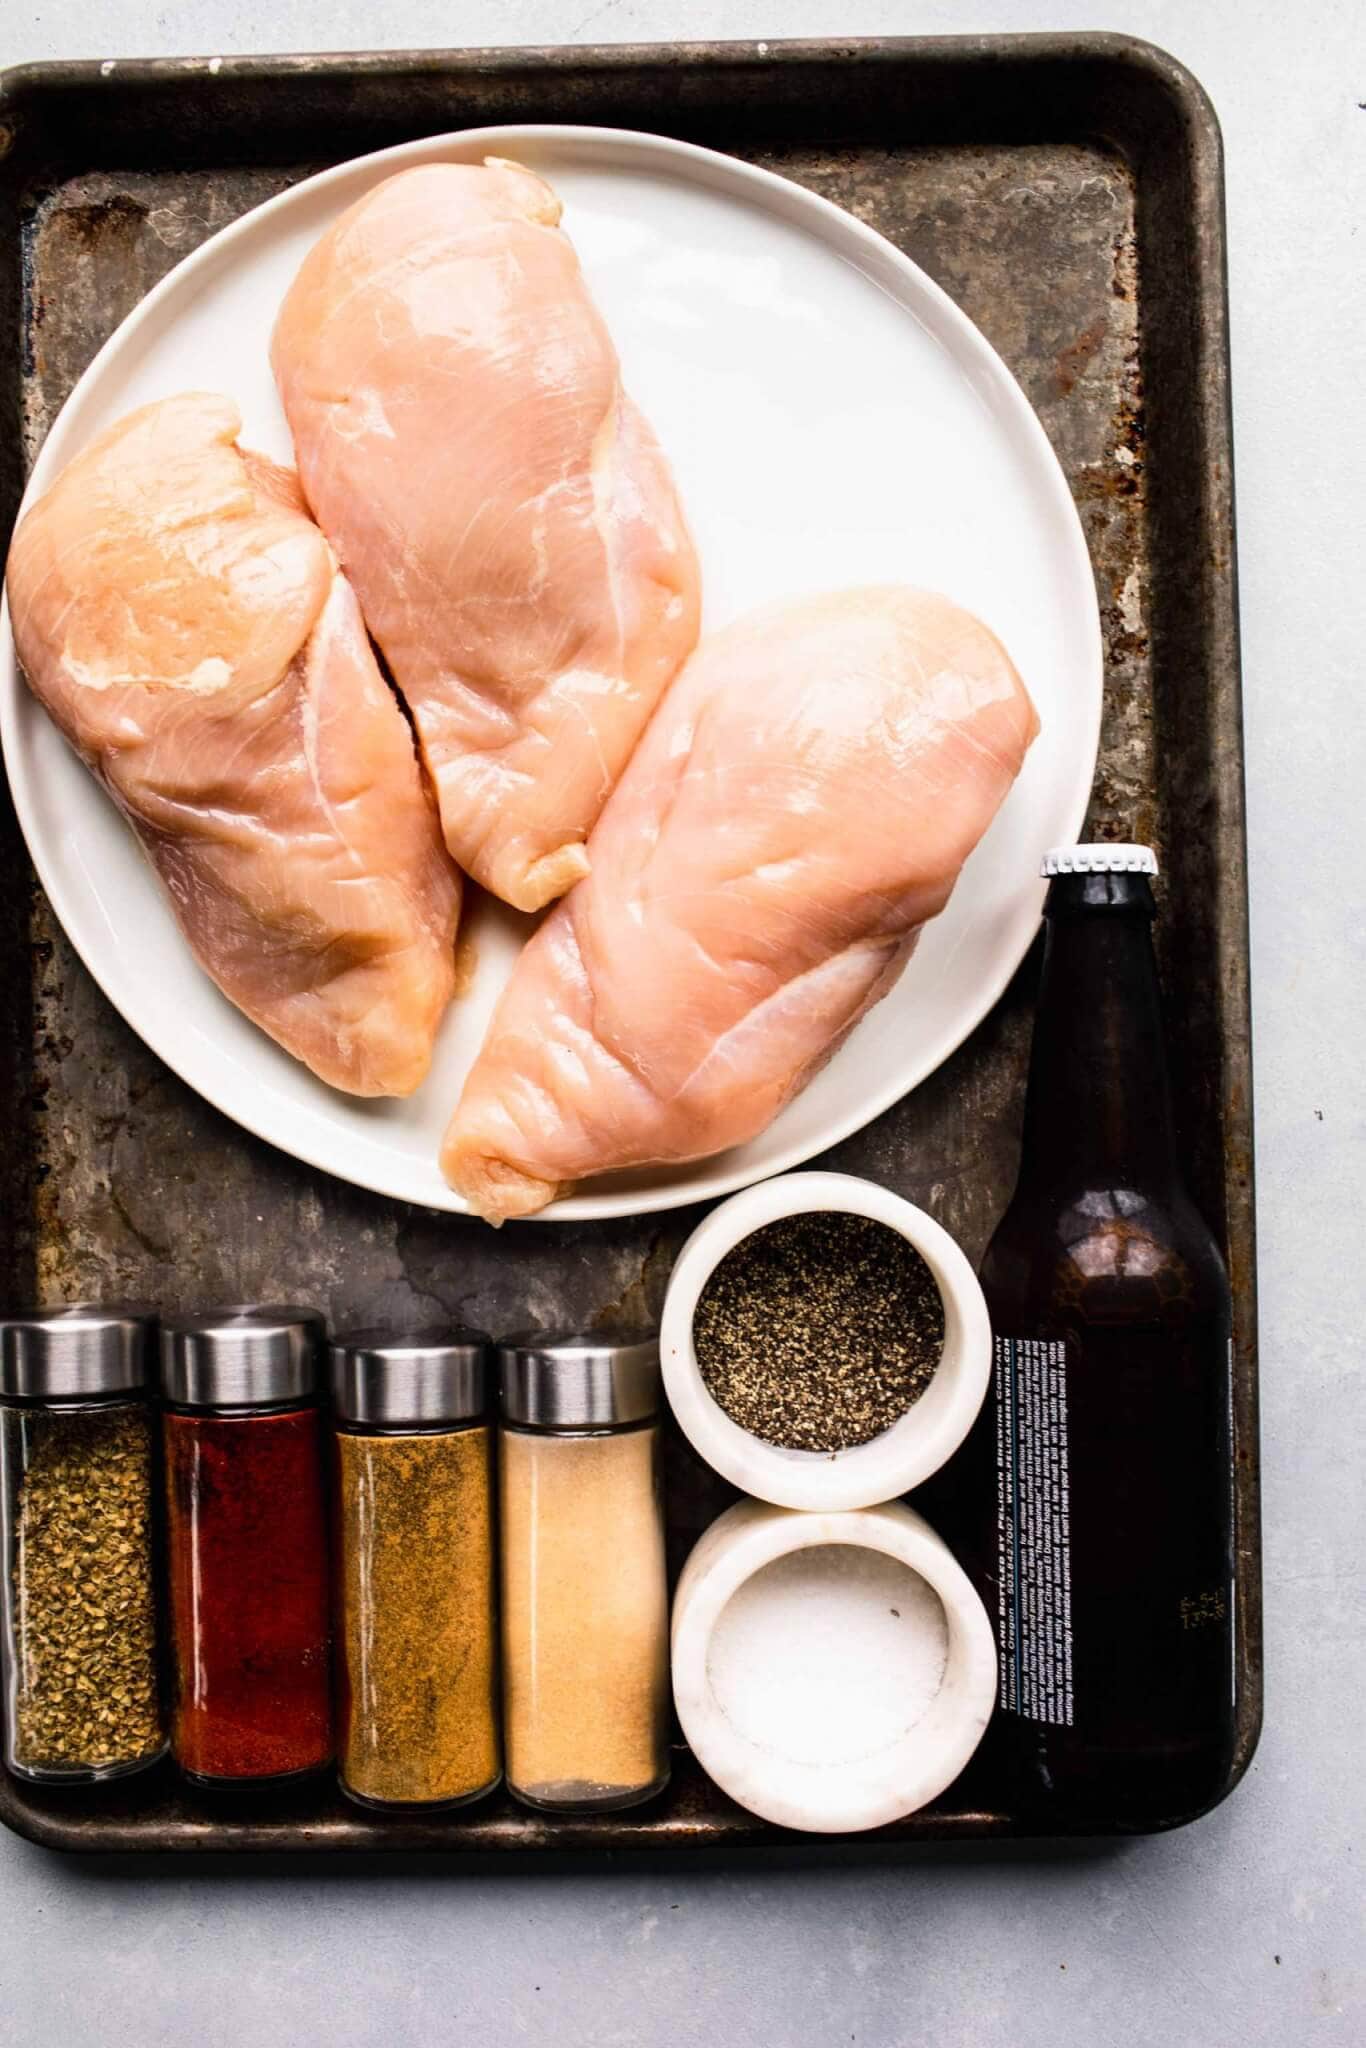 Ingredients for instant pot chicken breasts laid out on tray.